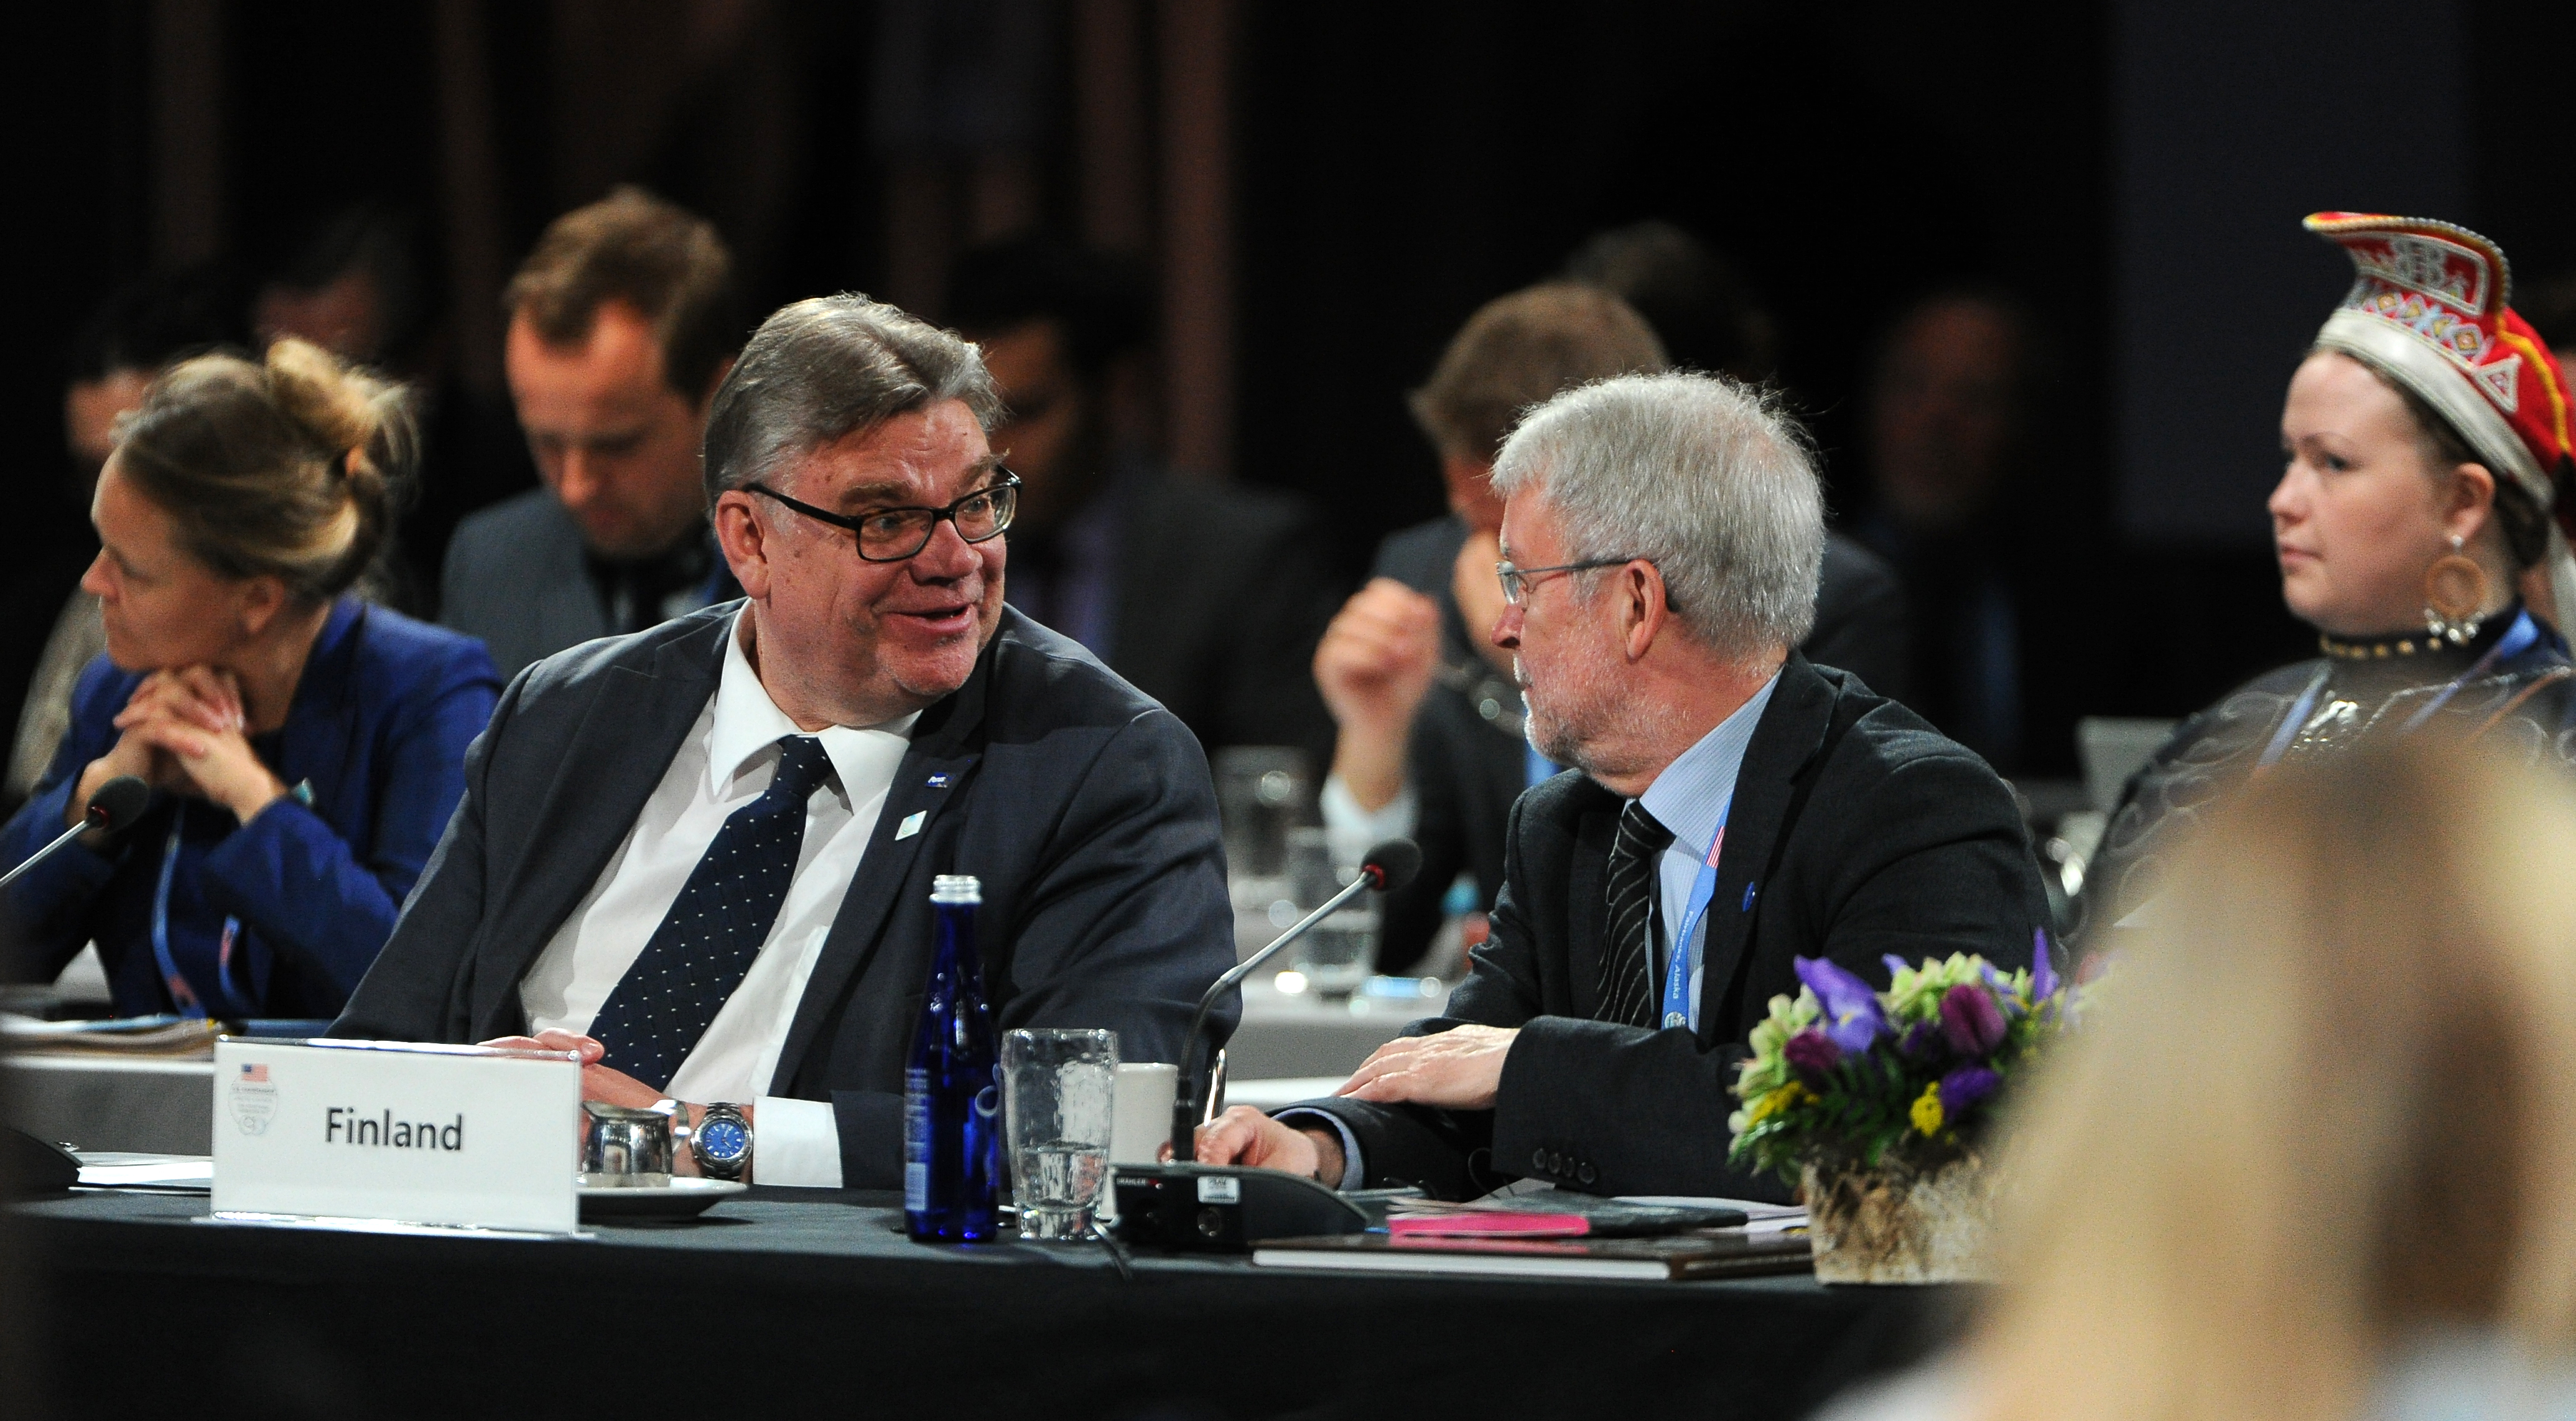 Minister of Foreign Affairs of Finland, Timo Soini, speaks with a colleague before the gavel is passed to him by US Secretary of State Rex Tillerson at the Arctic Council Ministerial at the Carlson Center in Fairbanks, Alaska on Thursday, May 11, 2017. (Bob Hallinen / Alaska Dispatch News)